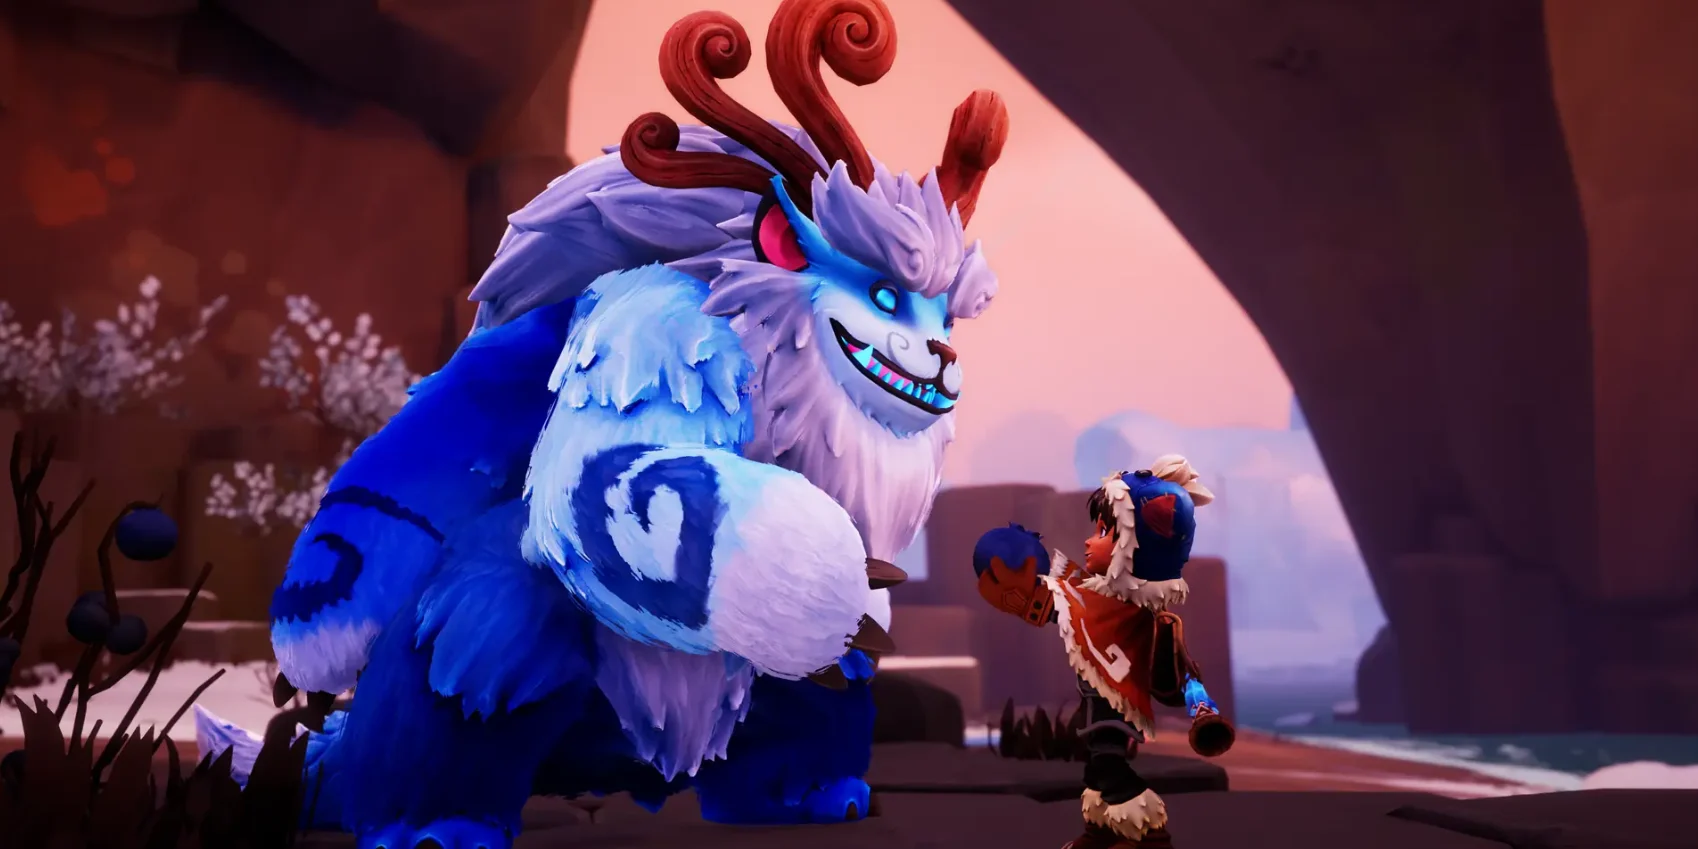 Song of Nunu is a ‘warm, wholesome story’ that will melt the Freljord’s secrets, devs say